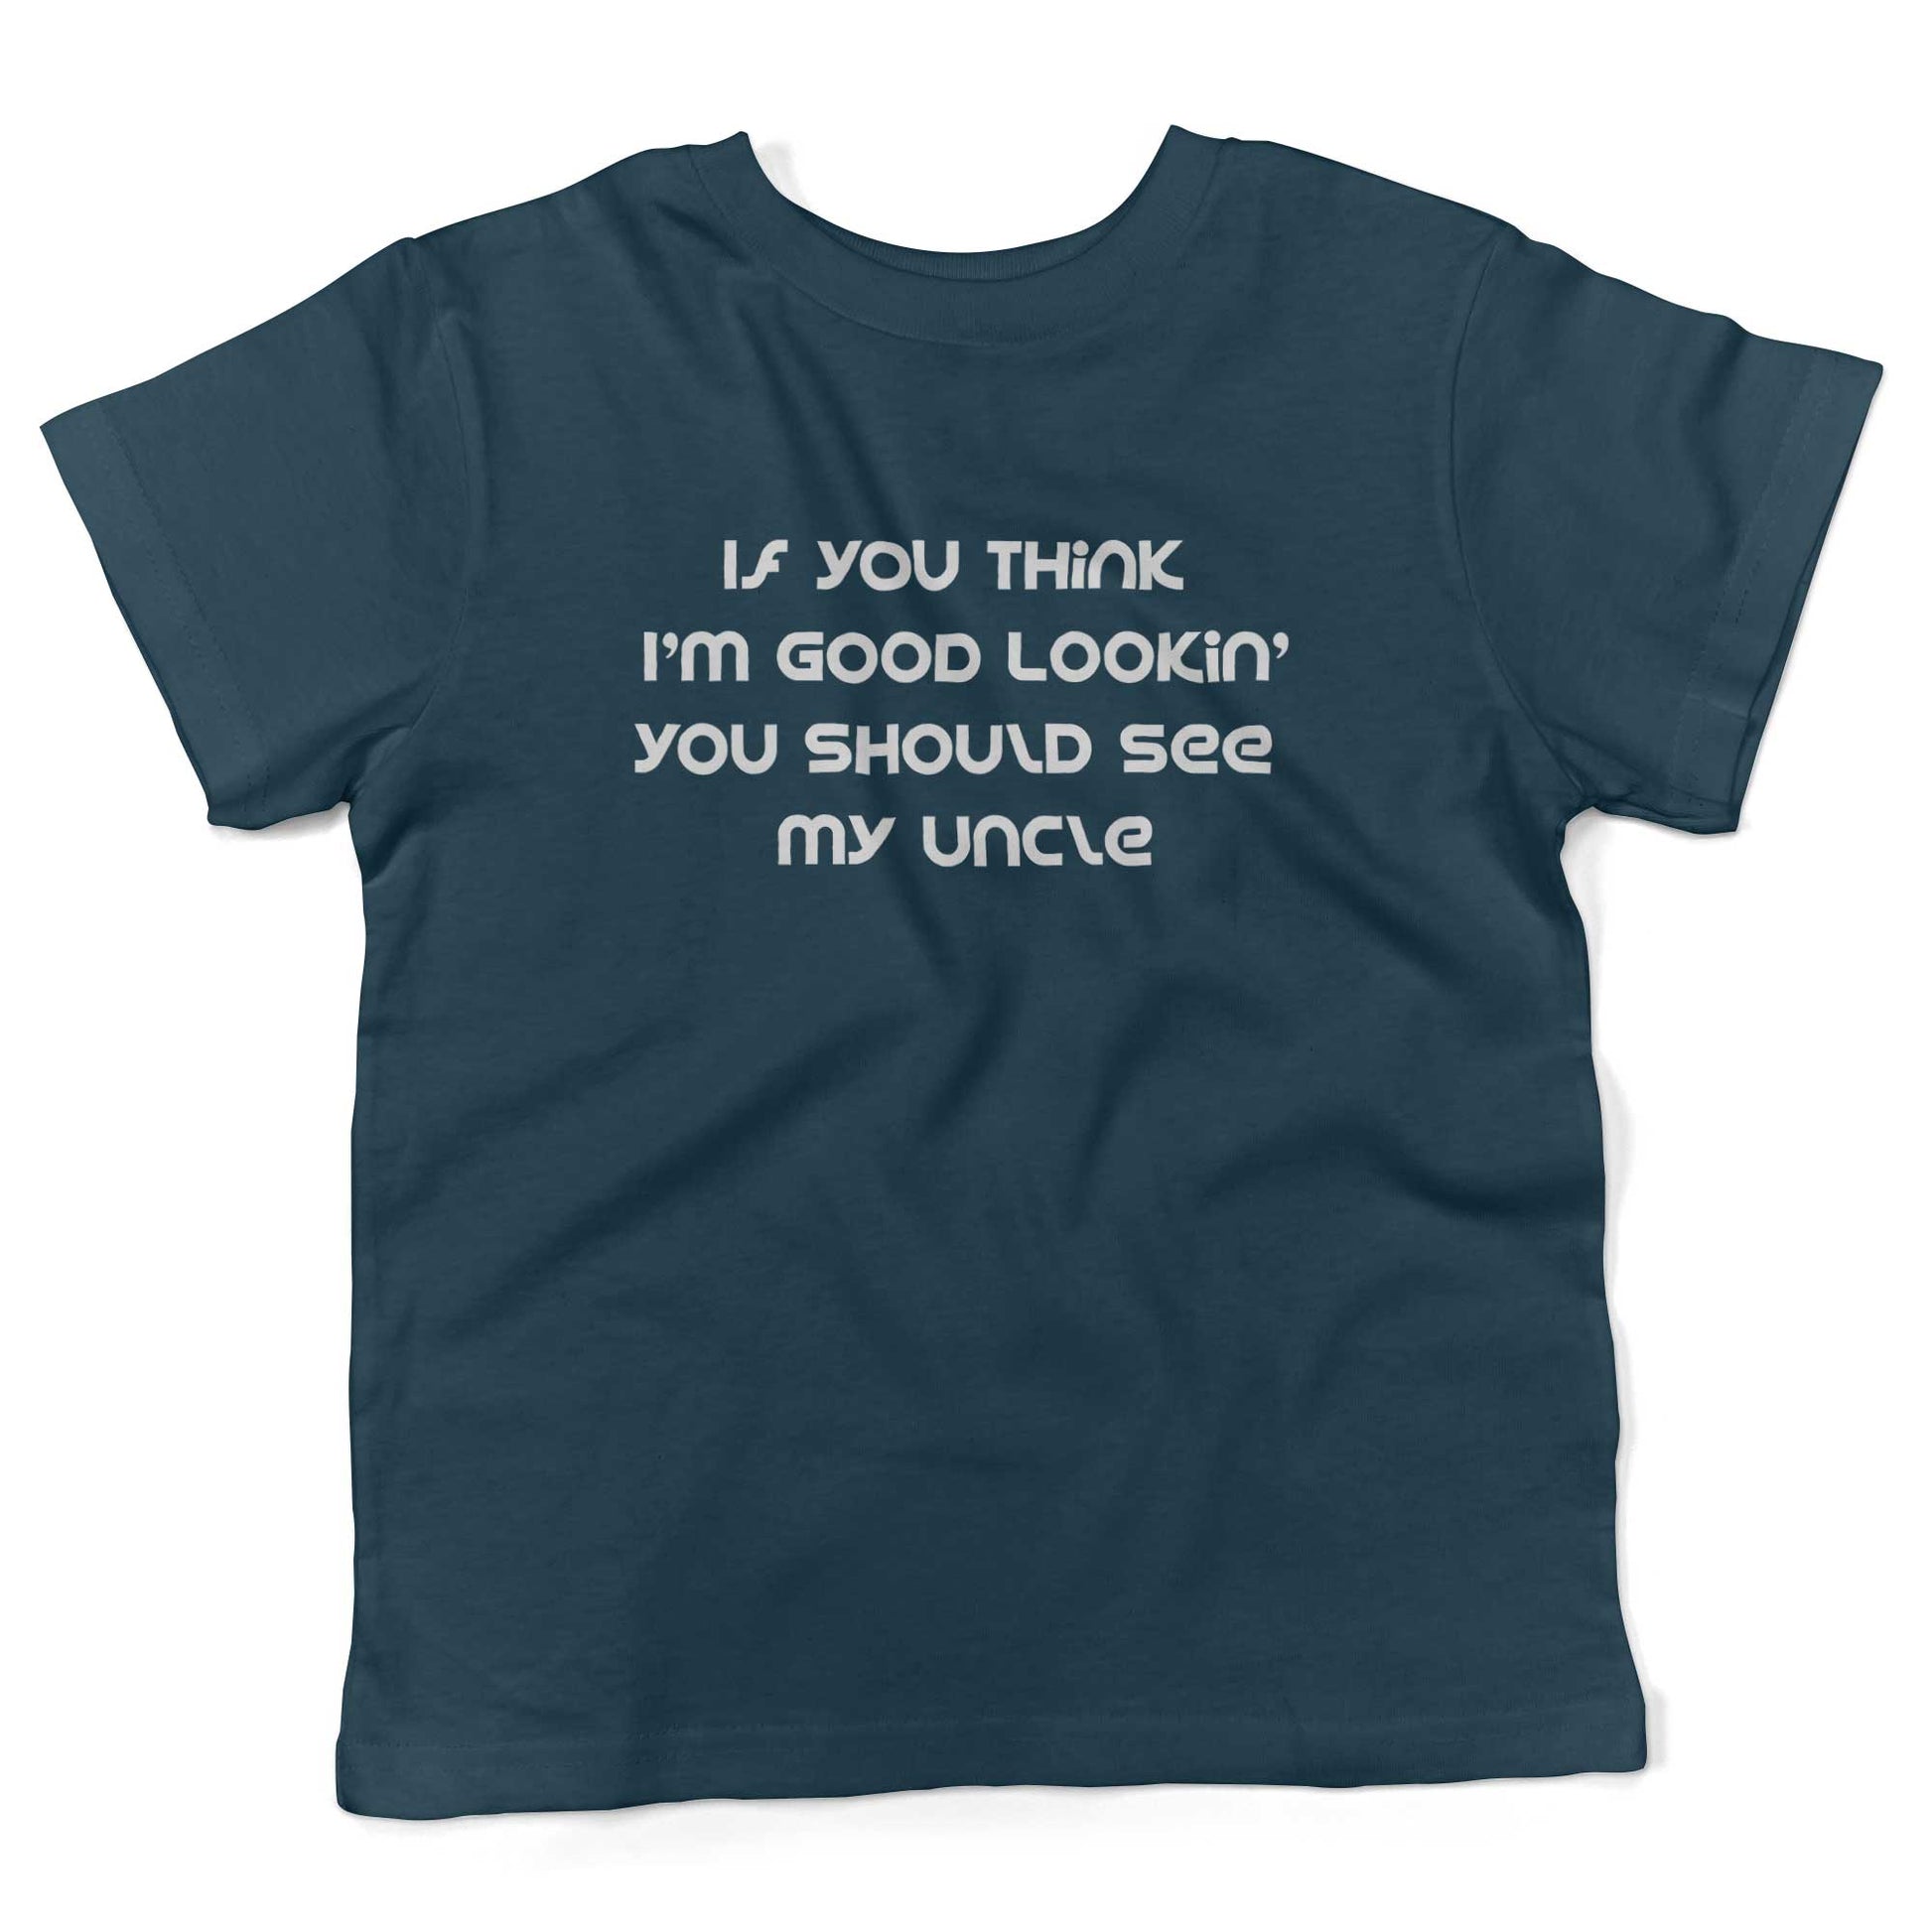 If You Think I'm Good Lookin' You Should See My Uncle Toddler Shirt-Organic Pacific Blue-2T